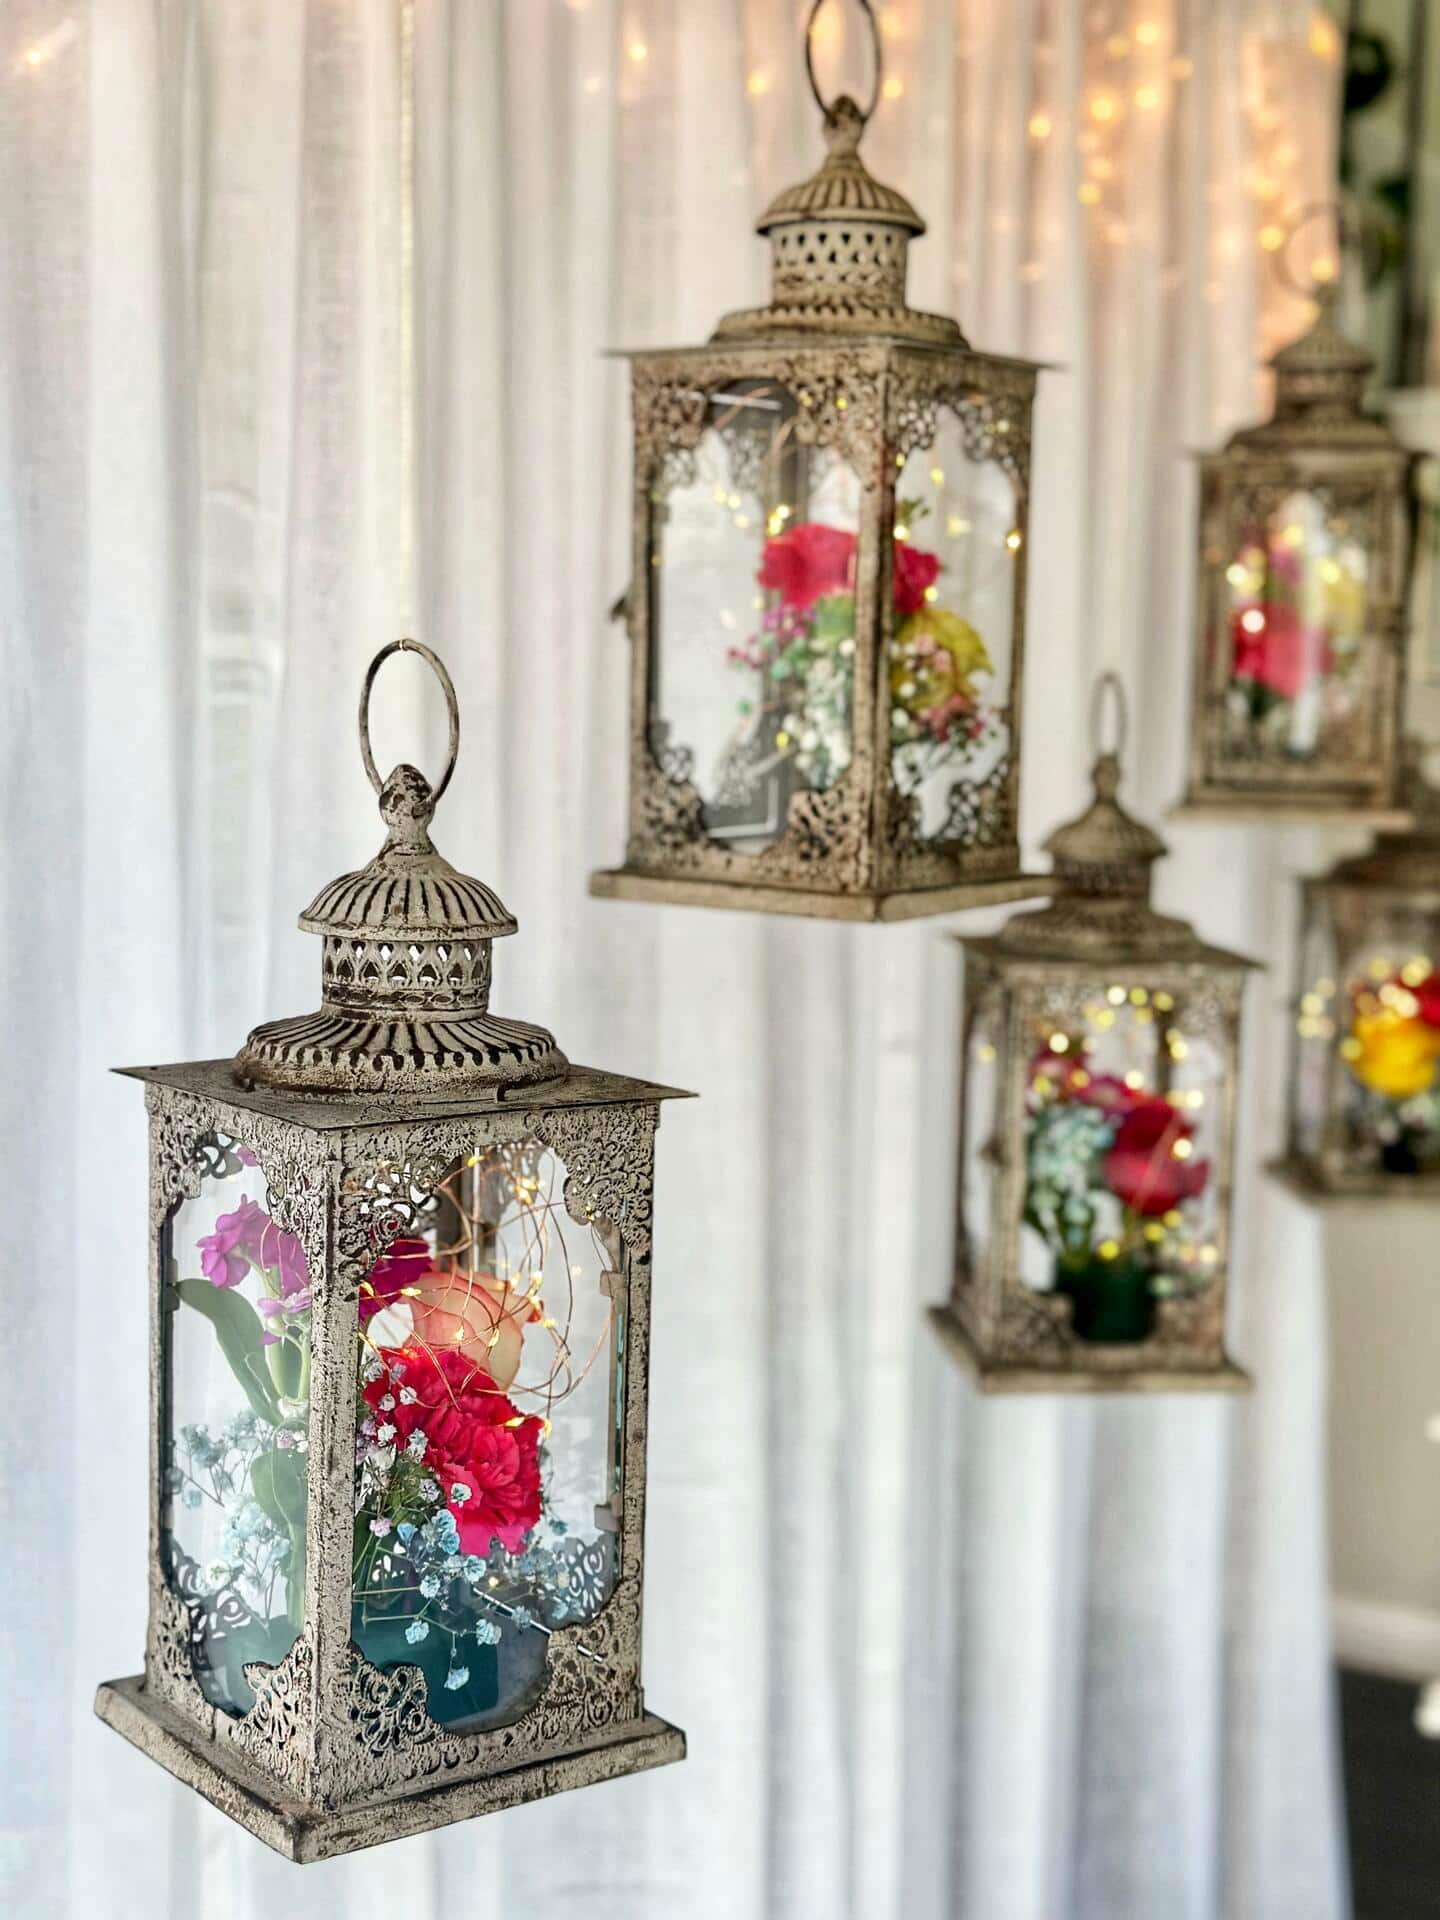 Hanging lanterns with lights and flowers inside